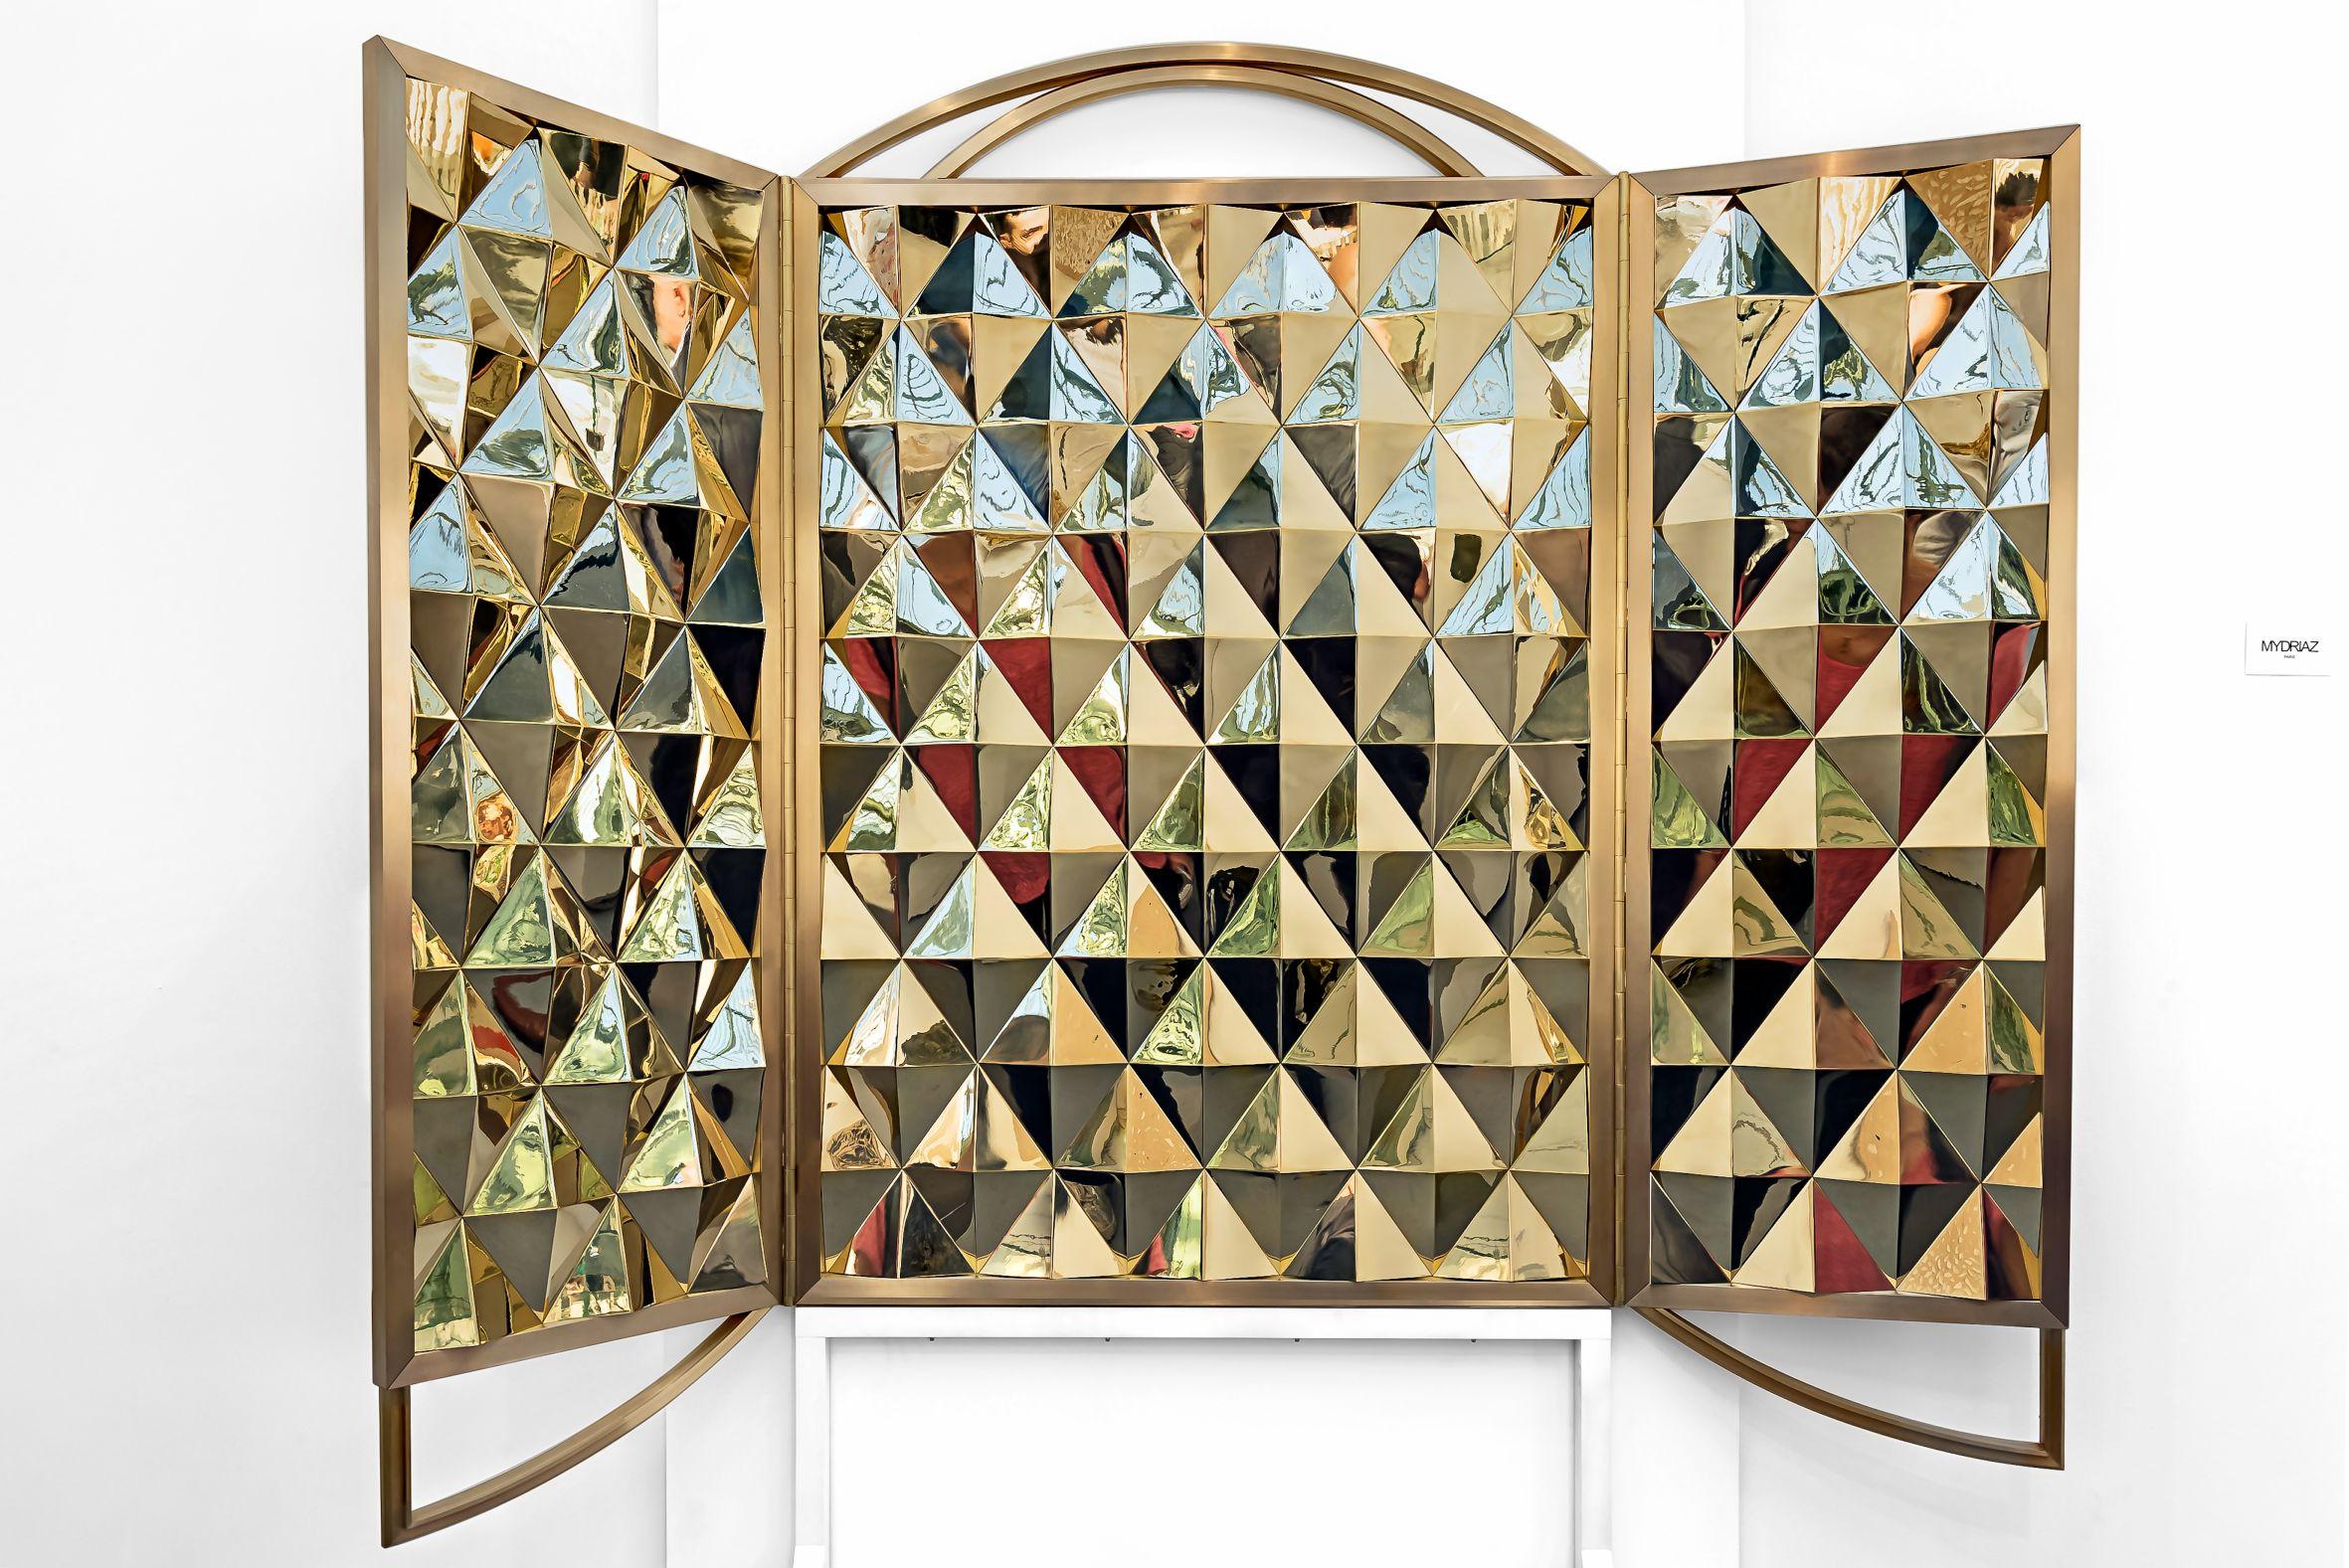 Retable mirror by MYDRIAZ
Dimensions: Open : W 165 x H 142 cm
 Closed : W 82.5 x H 142 cm
Materials: Brass
Finishes: Golden-plated polished brass, golden-plated or varnished brushed brass
75 kg

Our products are handmade in our workshop.